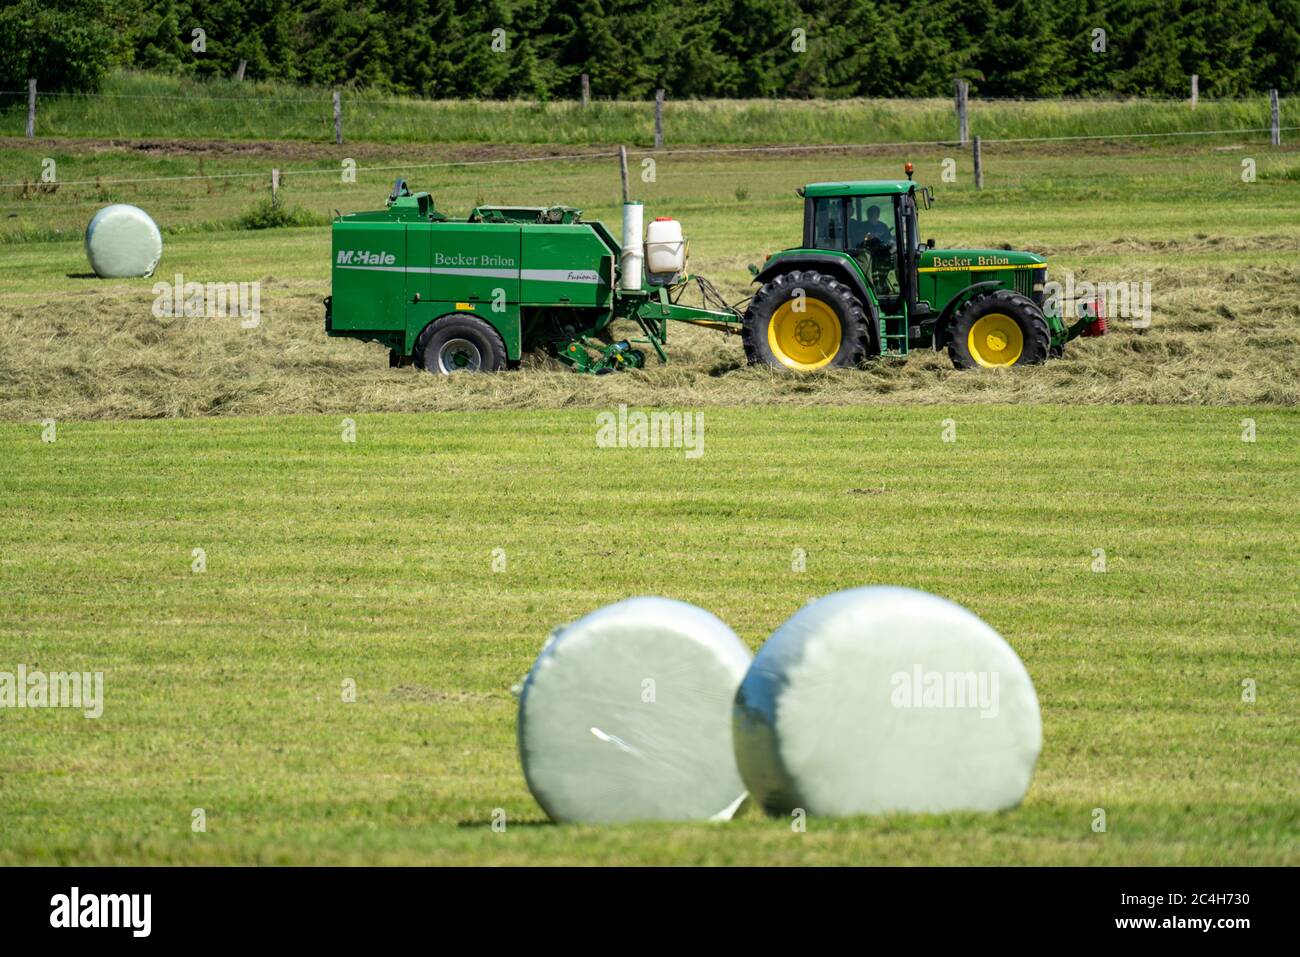 Hay harvest, farmer with agricultural machine, picks up mown hay, which is immediately pressed into bales and wrapped in film, baler/wrapper combinati Stock Photo